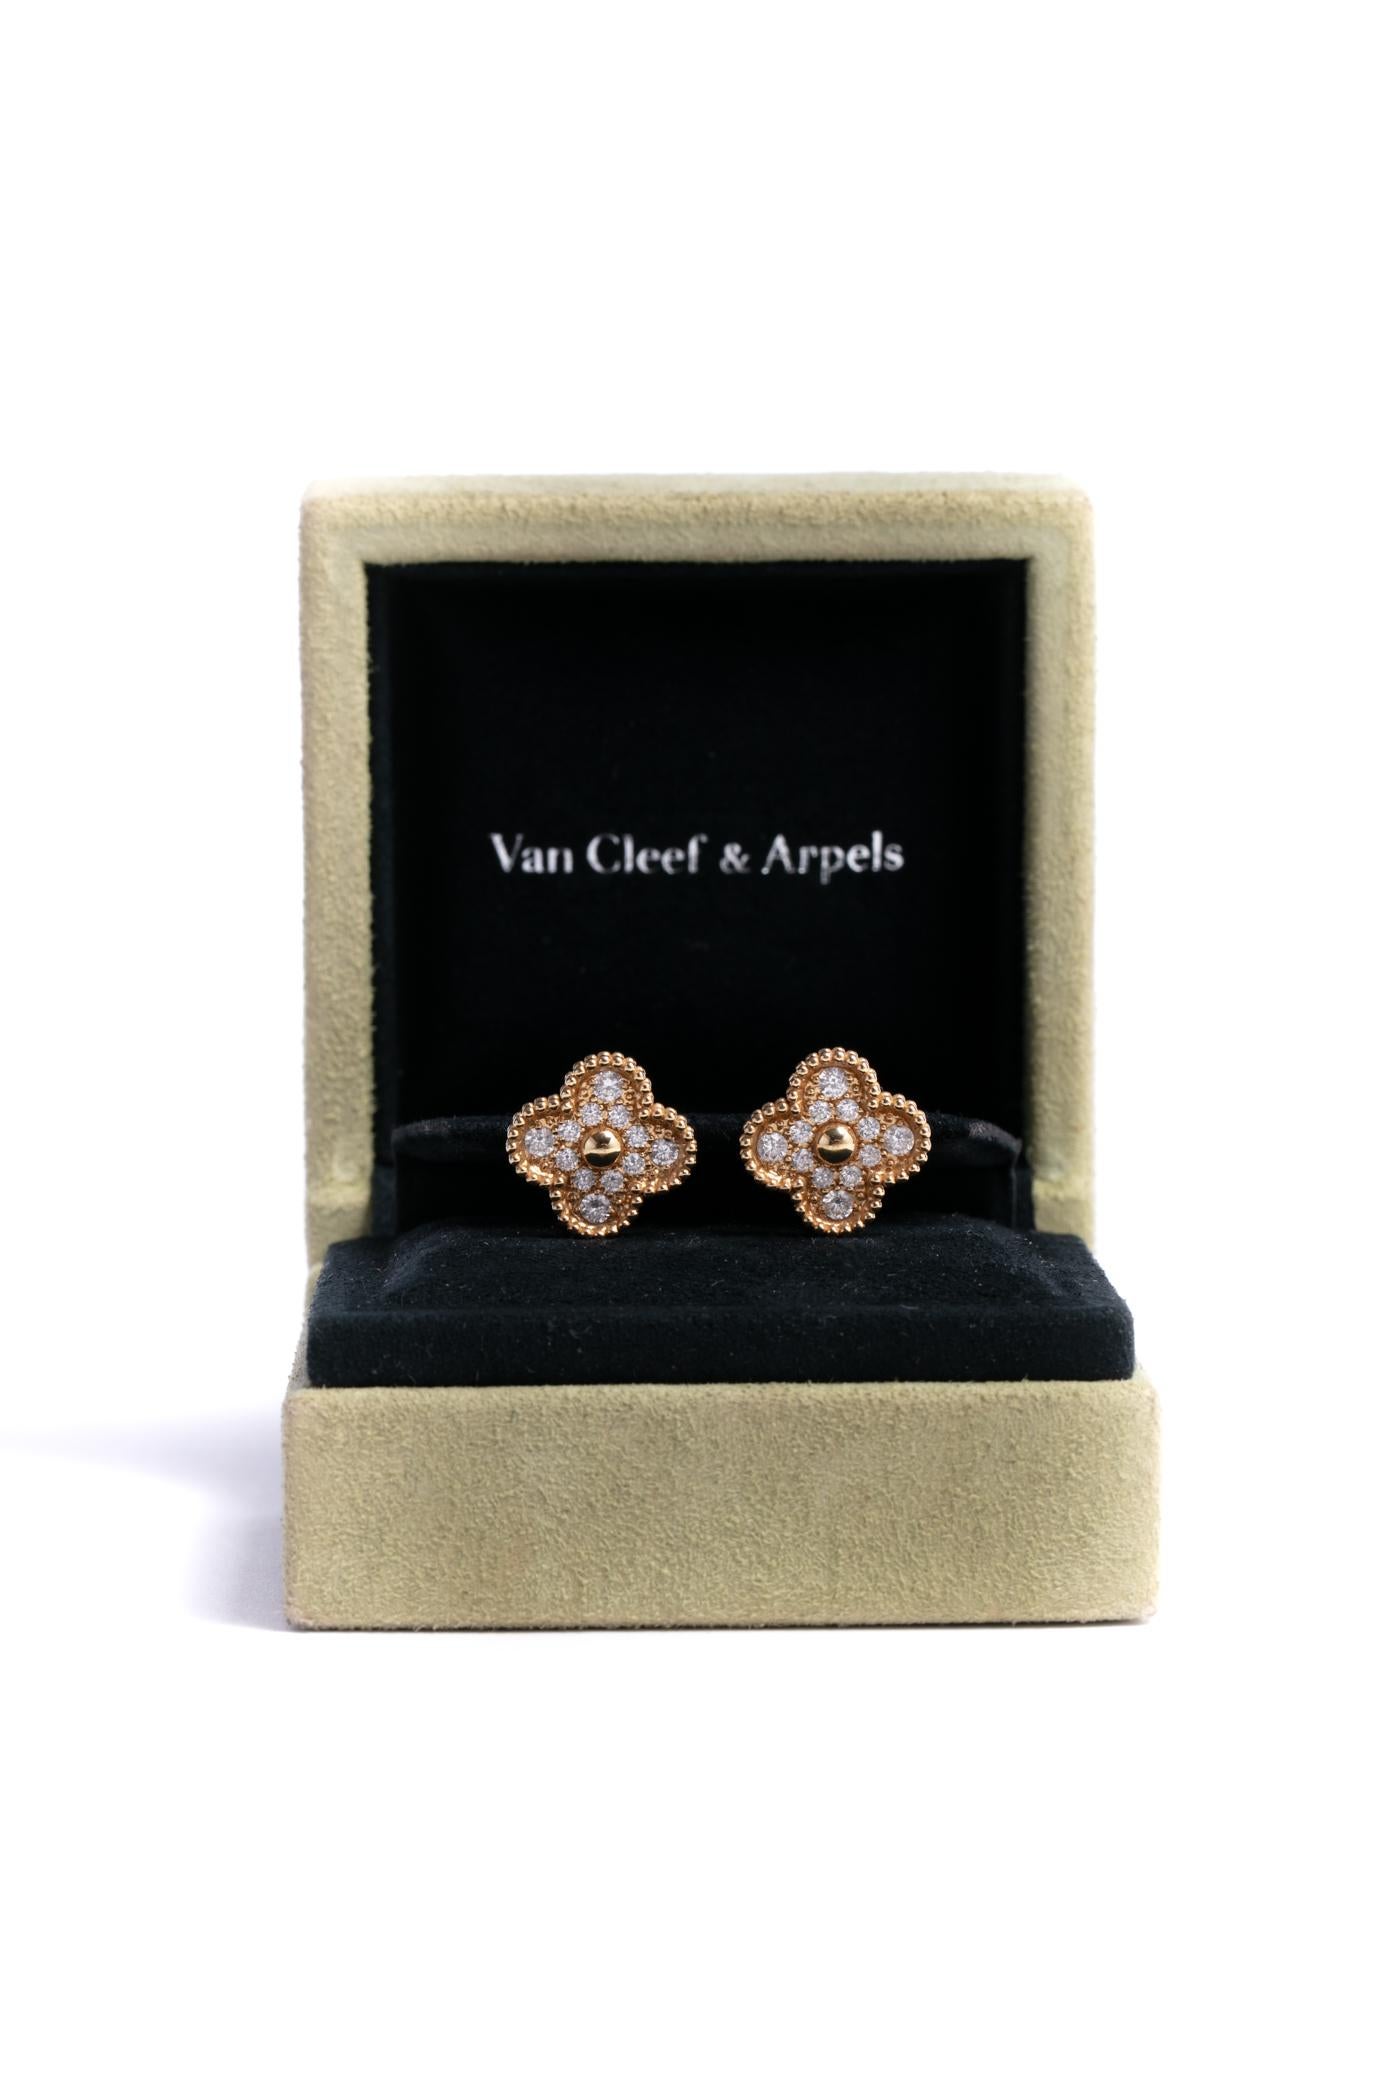 Van Cleef & Arpels classic vintage Alhambra earrings in 18kt yellow gold accented with 24 individual diamonds DEF in color and IF - VVS in clarity. These classic earrings also feature omega backs with removable post
These timeless earrings come with